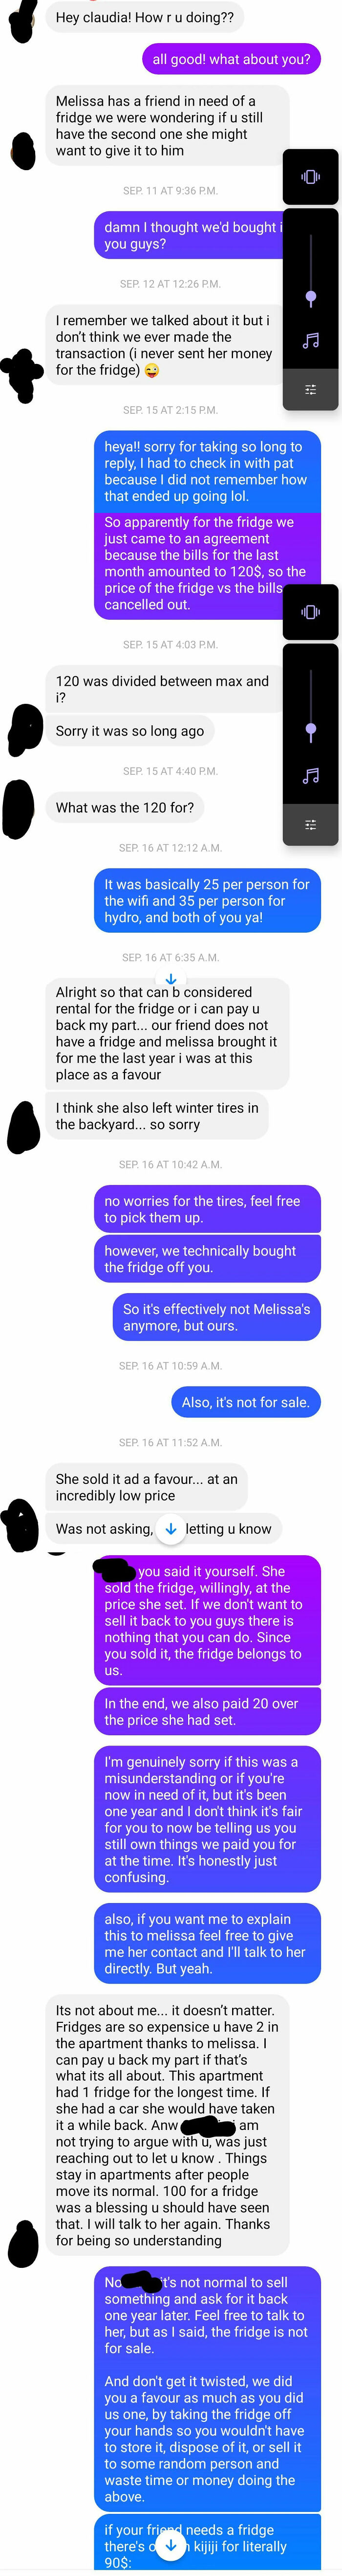 Last Year, Our Flatmate Moved Out And Sold Us Her Friends' Fridge That She'd Been Using. This Year, She Wants It Back, And She's "Not Asking, But Telling"